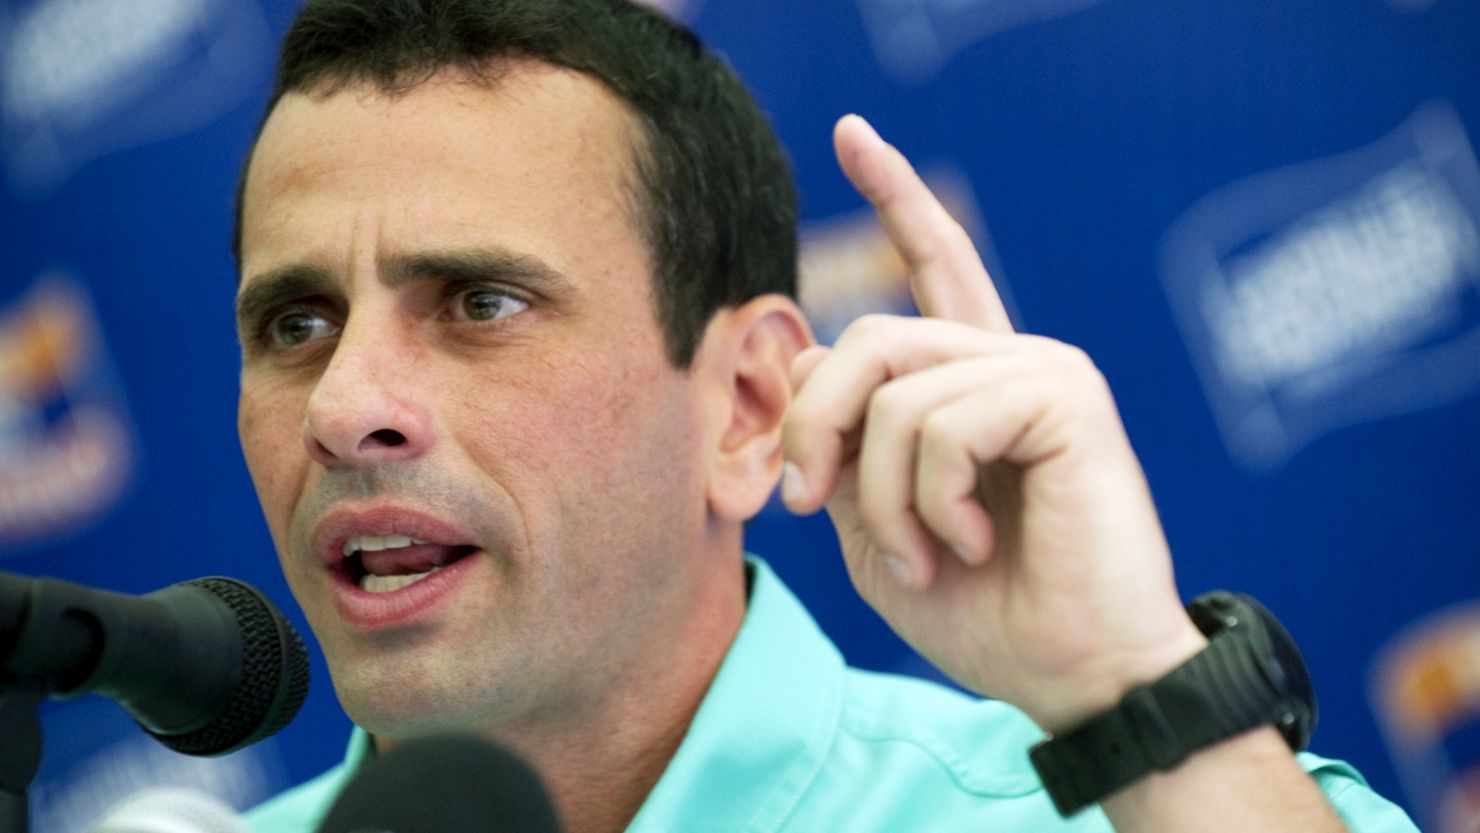 Venezuelan candidate of the opposition Democratic Unity coalition for the upcoming primary elections, Henrique Capriles Radonski, delivers a speech during press conference in Caracas on February 7, 2012. 